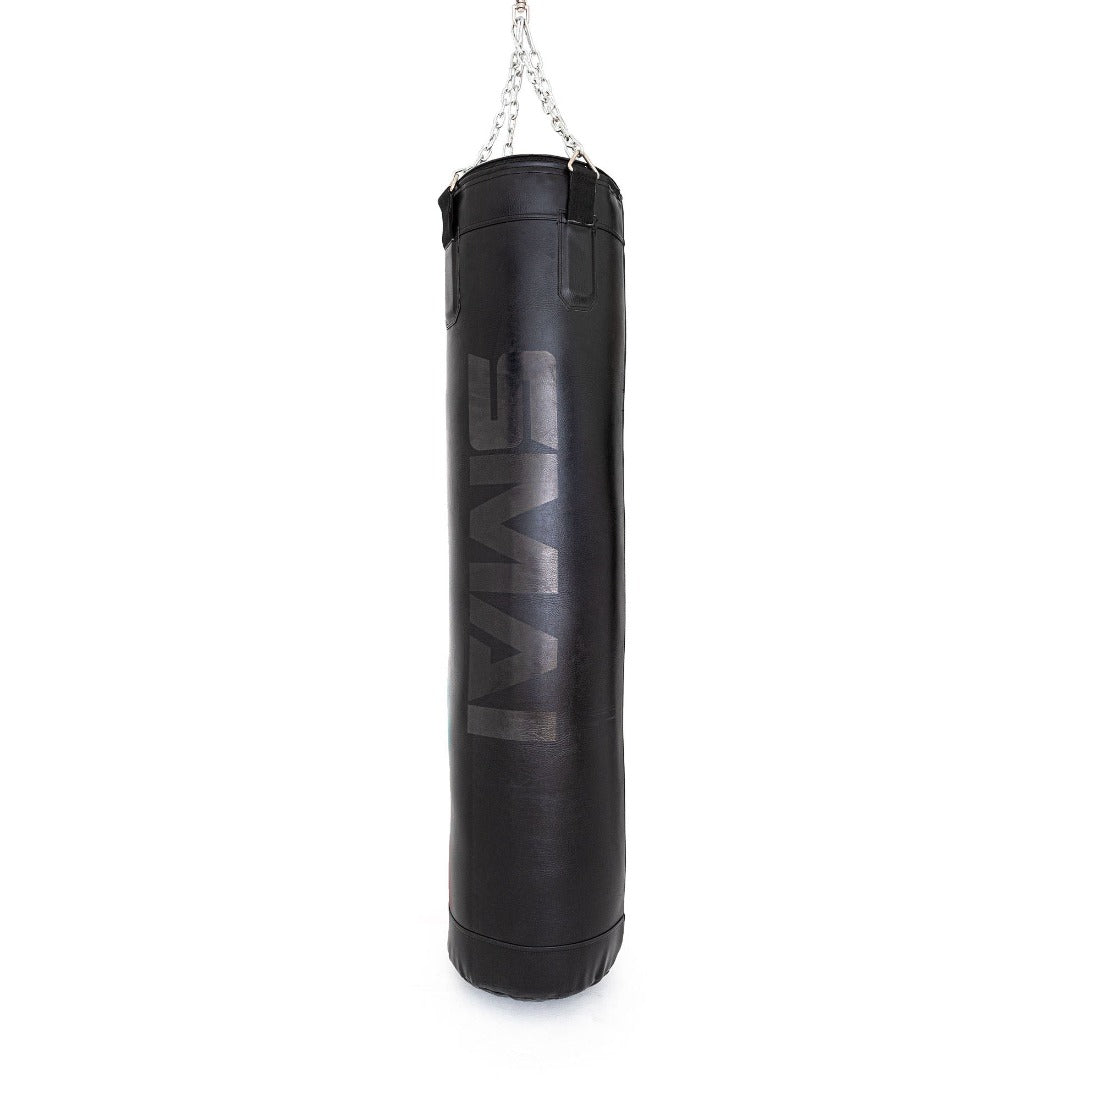 NZ BOXER NZs TOP BRAND FOR SERIOUS FIGHT AND FIGHT FITNESS GEAR NZ BOXER  LARGE PUNCH BAG-